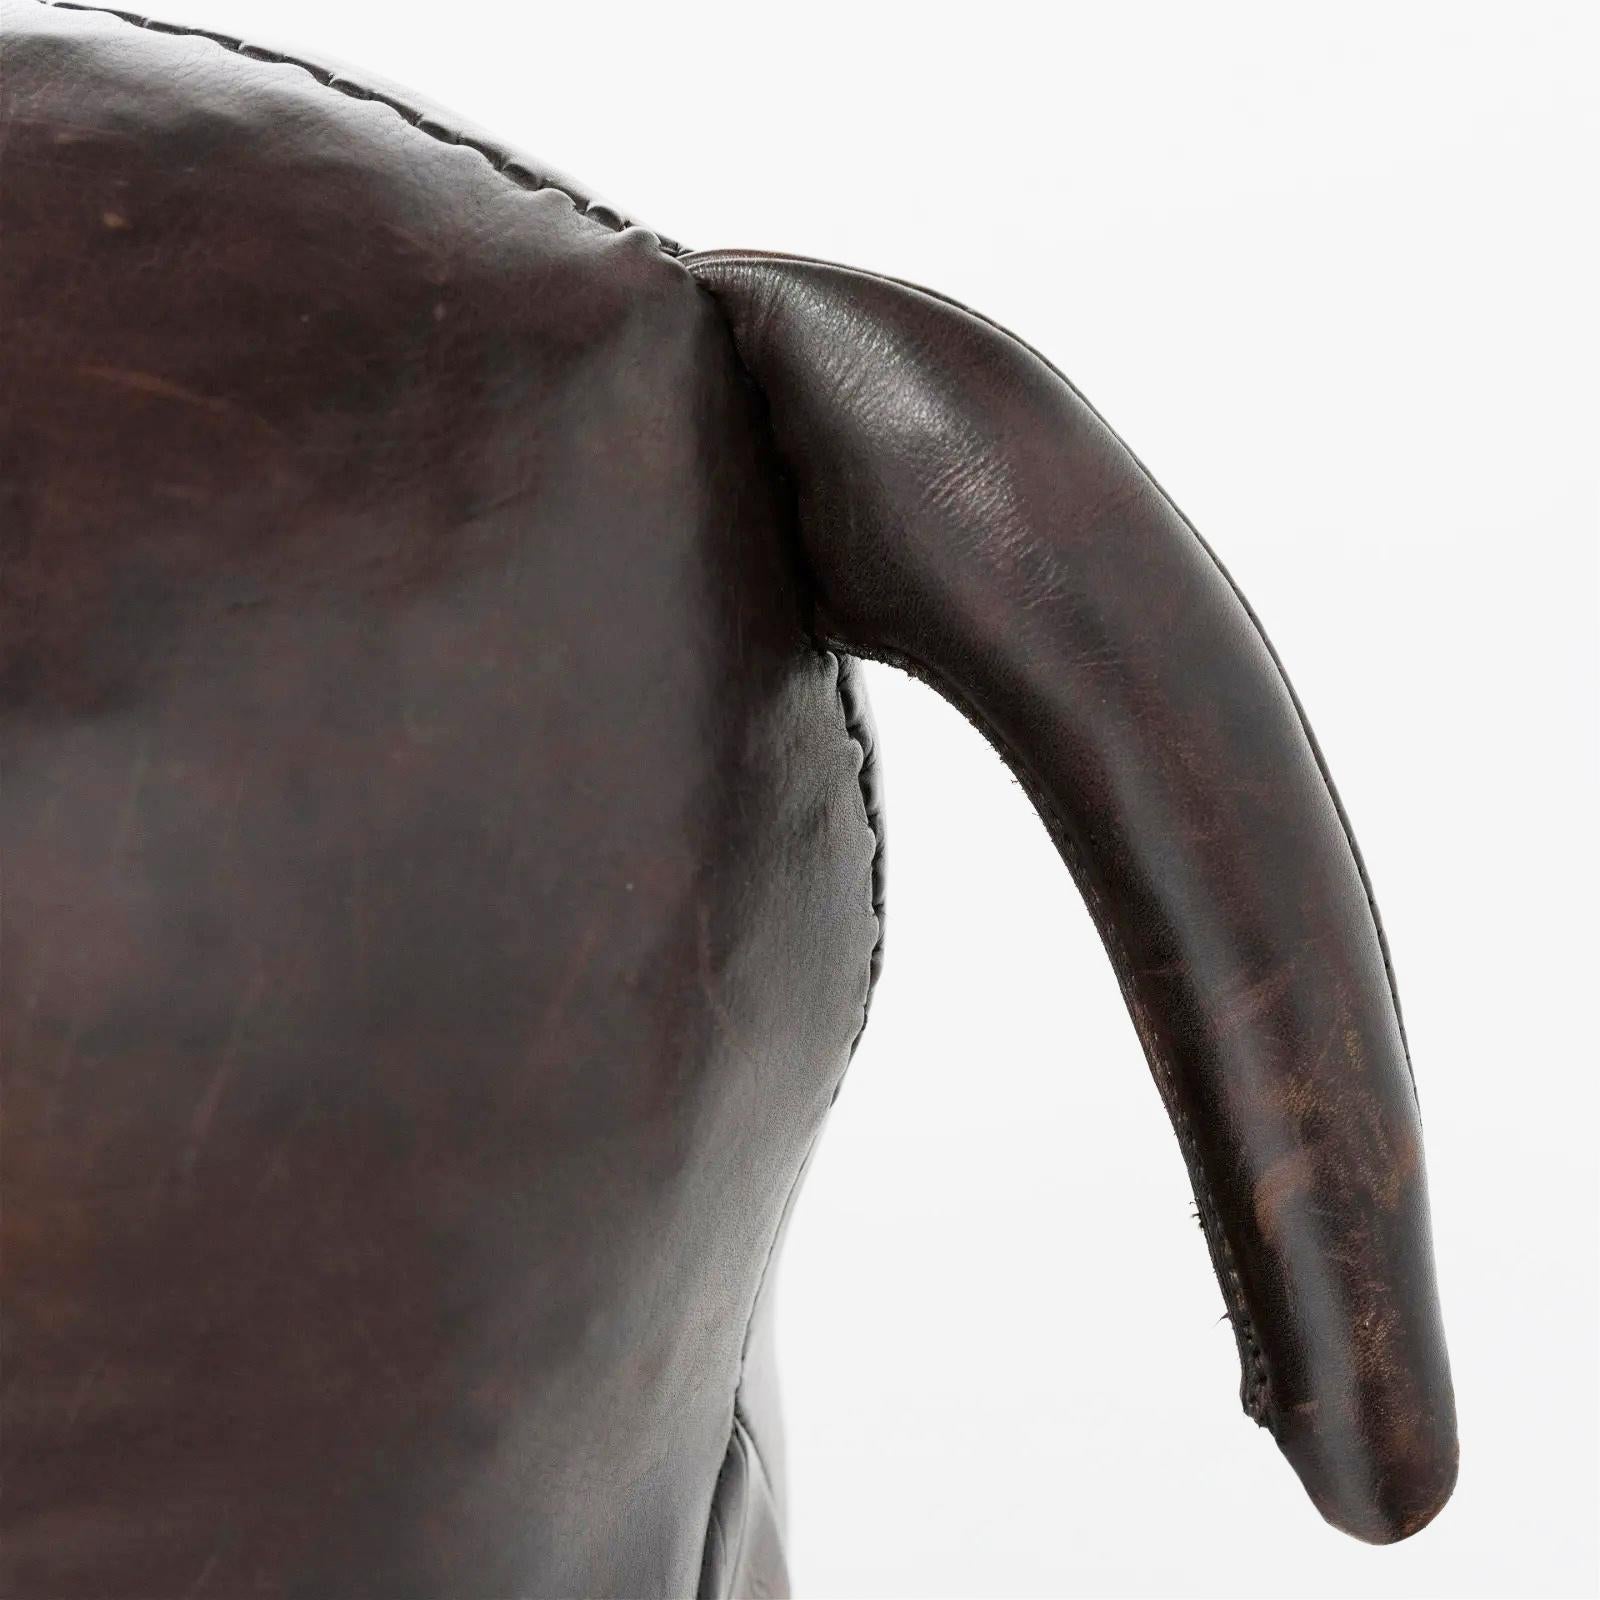 Vintage Leather Hippo,
Dmitri Omersa for Abercrombie & Fitch,
The 1970s

The leather footstool is designed in the shape of a hippo in beautiful dark leather.

Dimensions: 18 inches high x 34 inches long x 12 inches wide

Reference: 
omersa